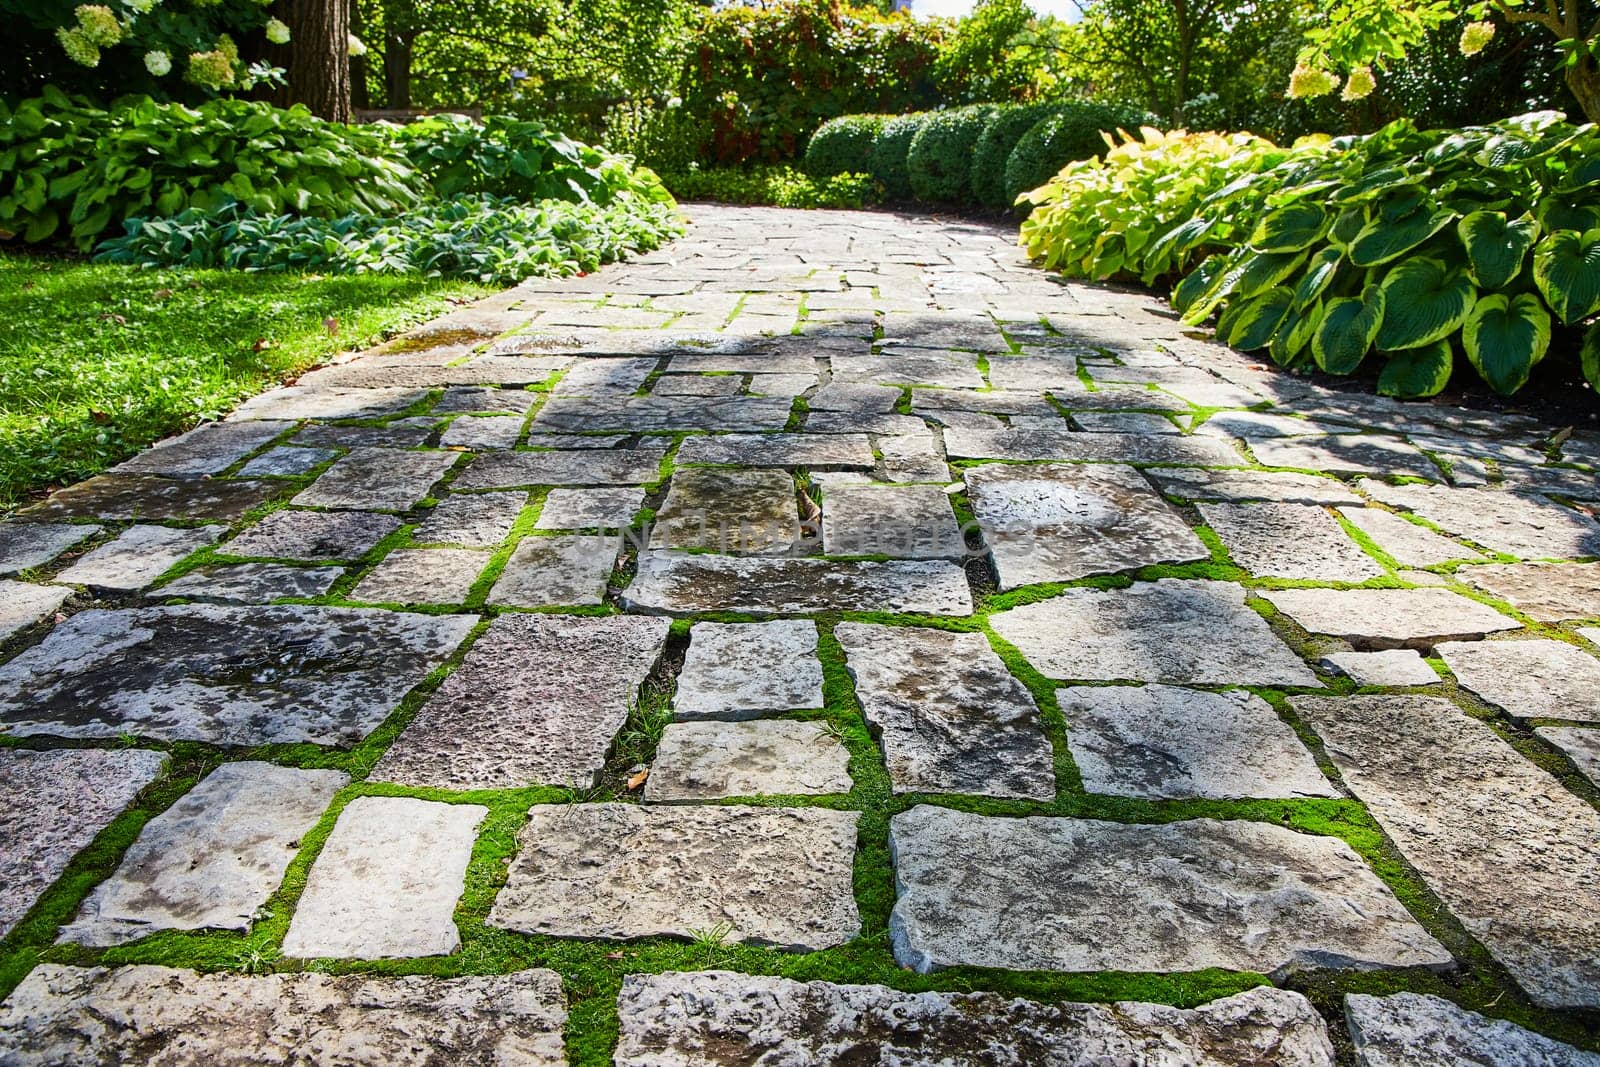 Vibrant 2023 view of a serene cobblestone pathway in Elkhart, Indiana's Botanic Gardens, highlighting the lush greenery and natural beauty of suburban landscaping.